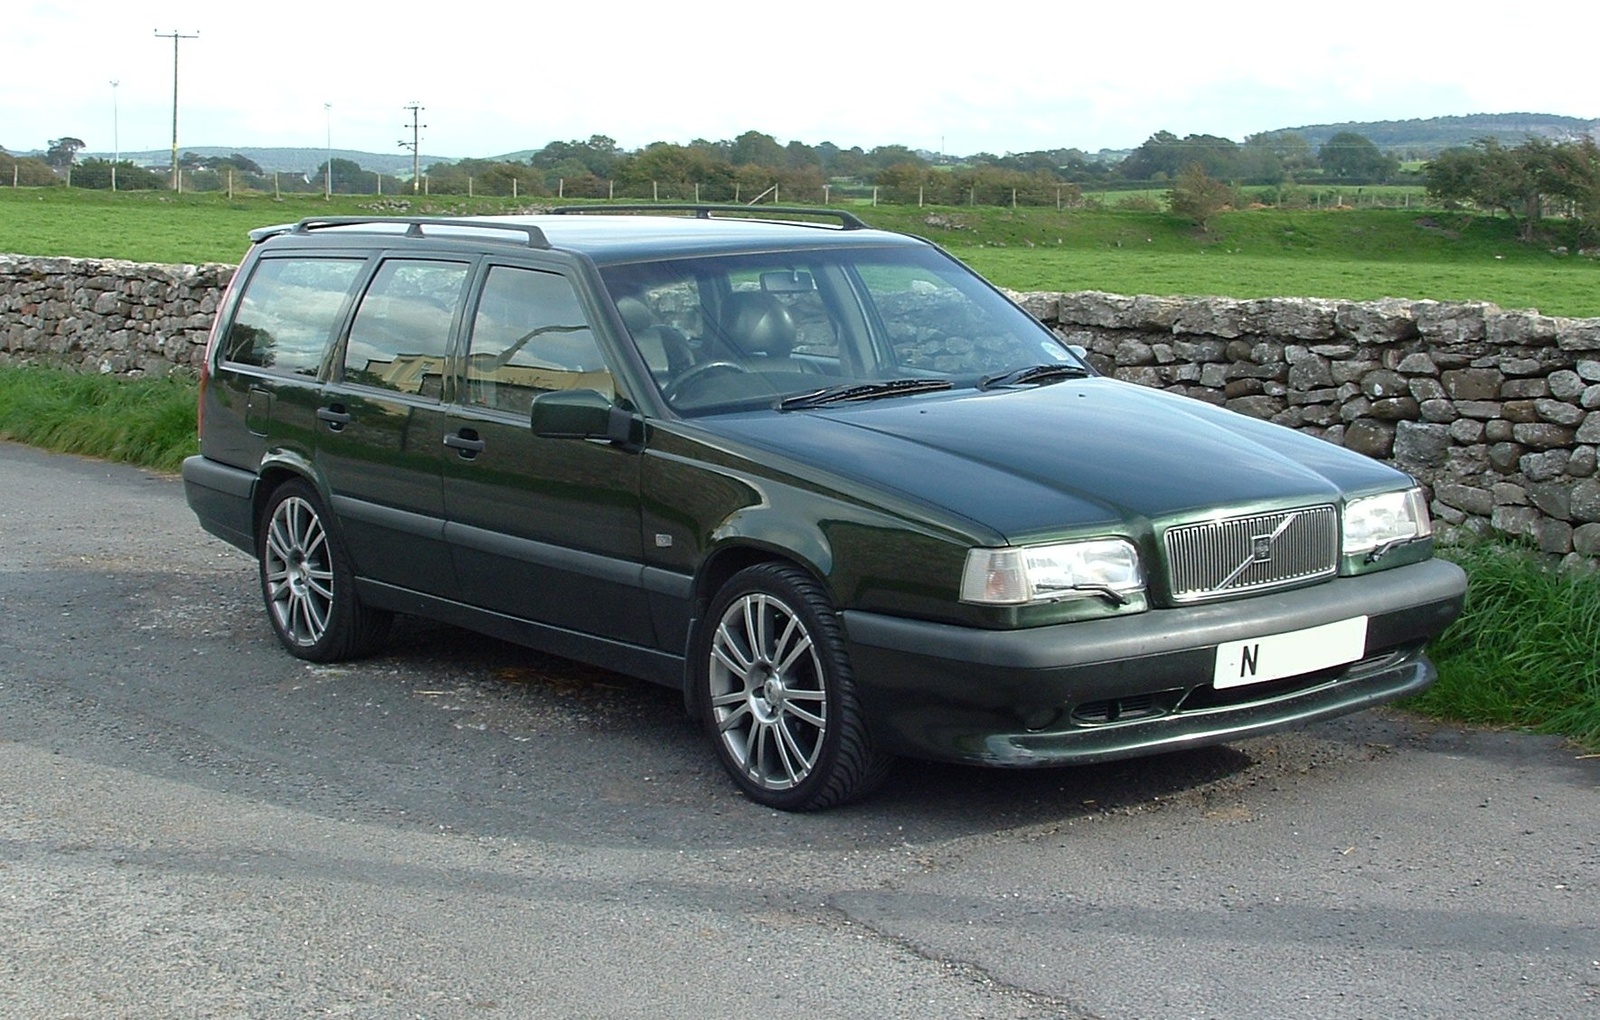 1995 Volvo 850 4 Dr T5R Turbo Wagon - Pictures - 1995 Volvo 850 4 .